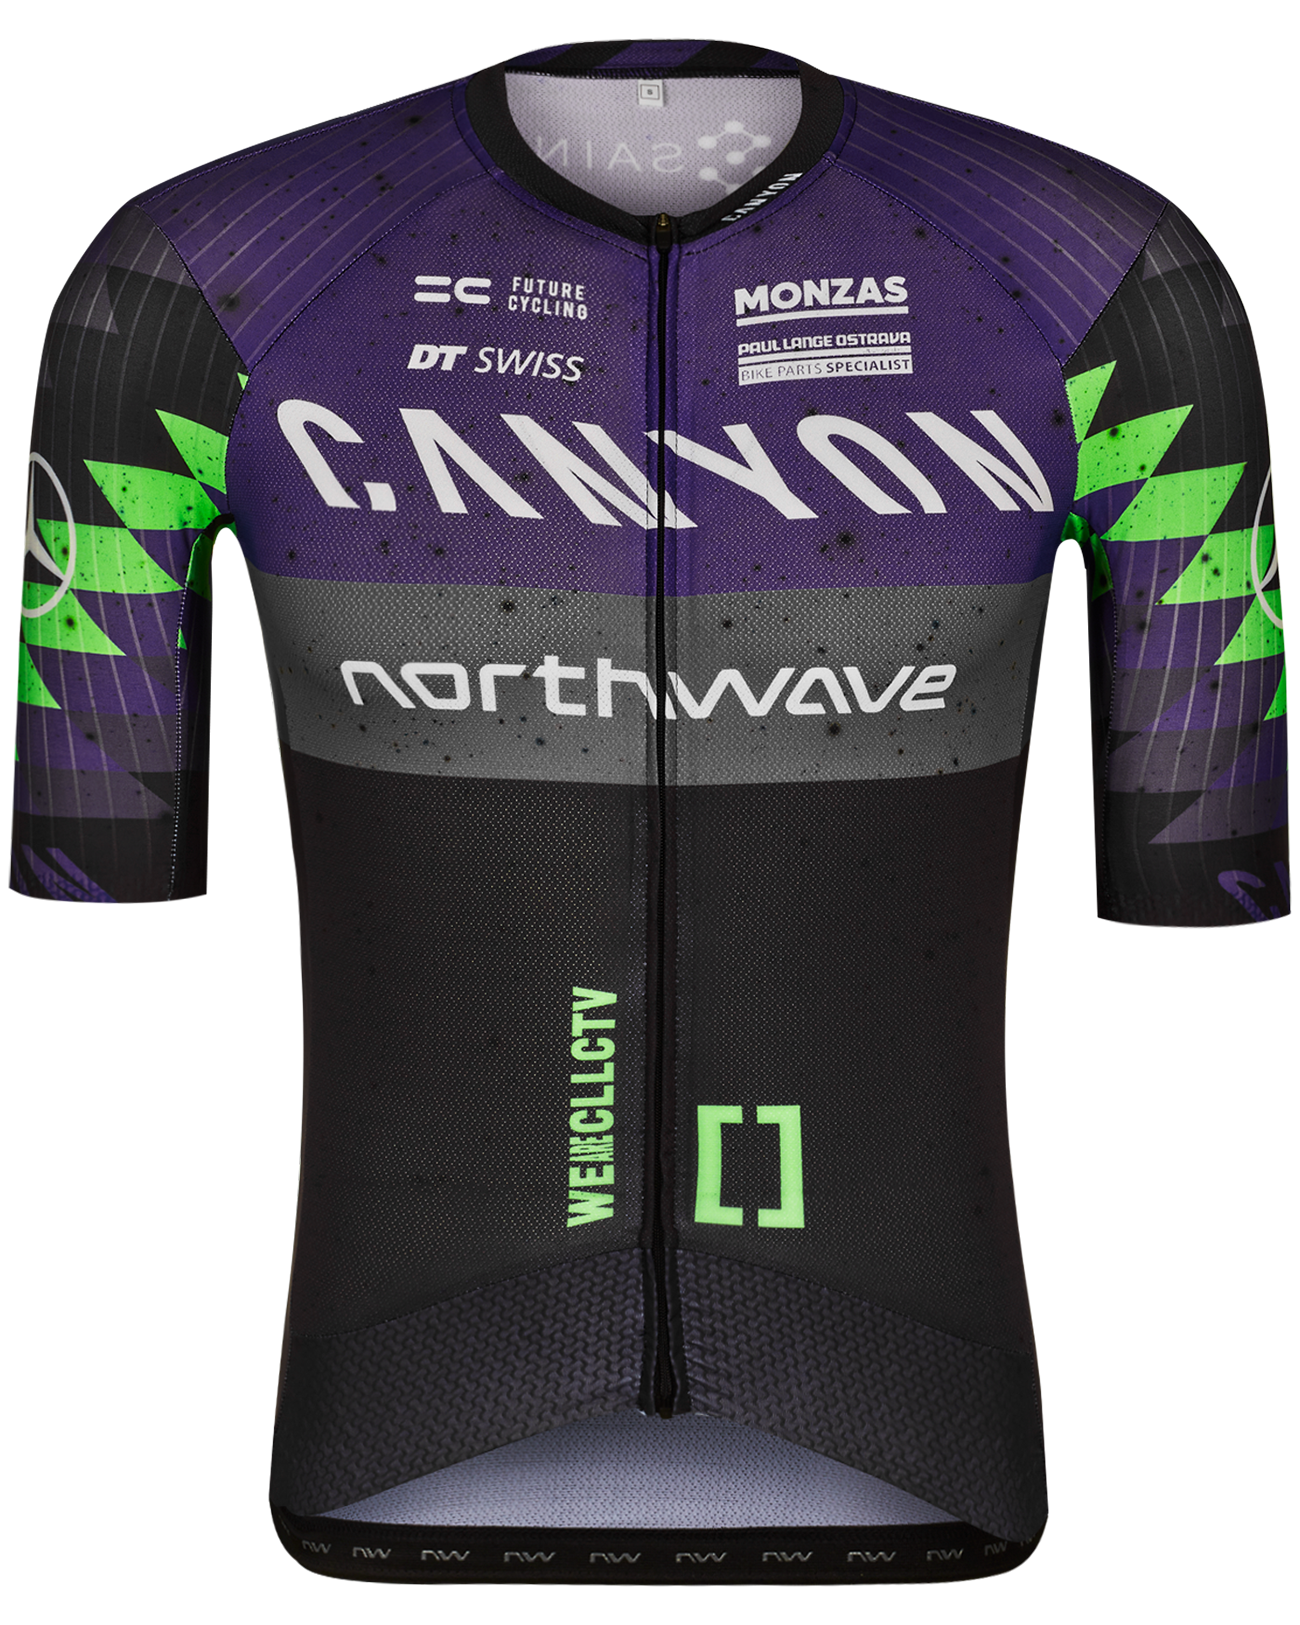 Noord Stof kans Canyon Northwave MTB Team Jersey | CANYON NL